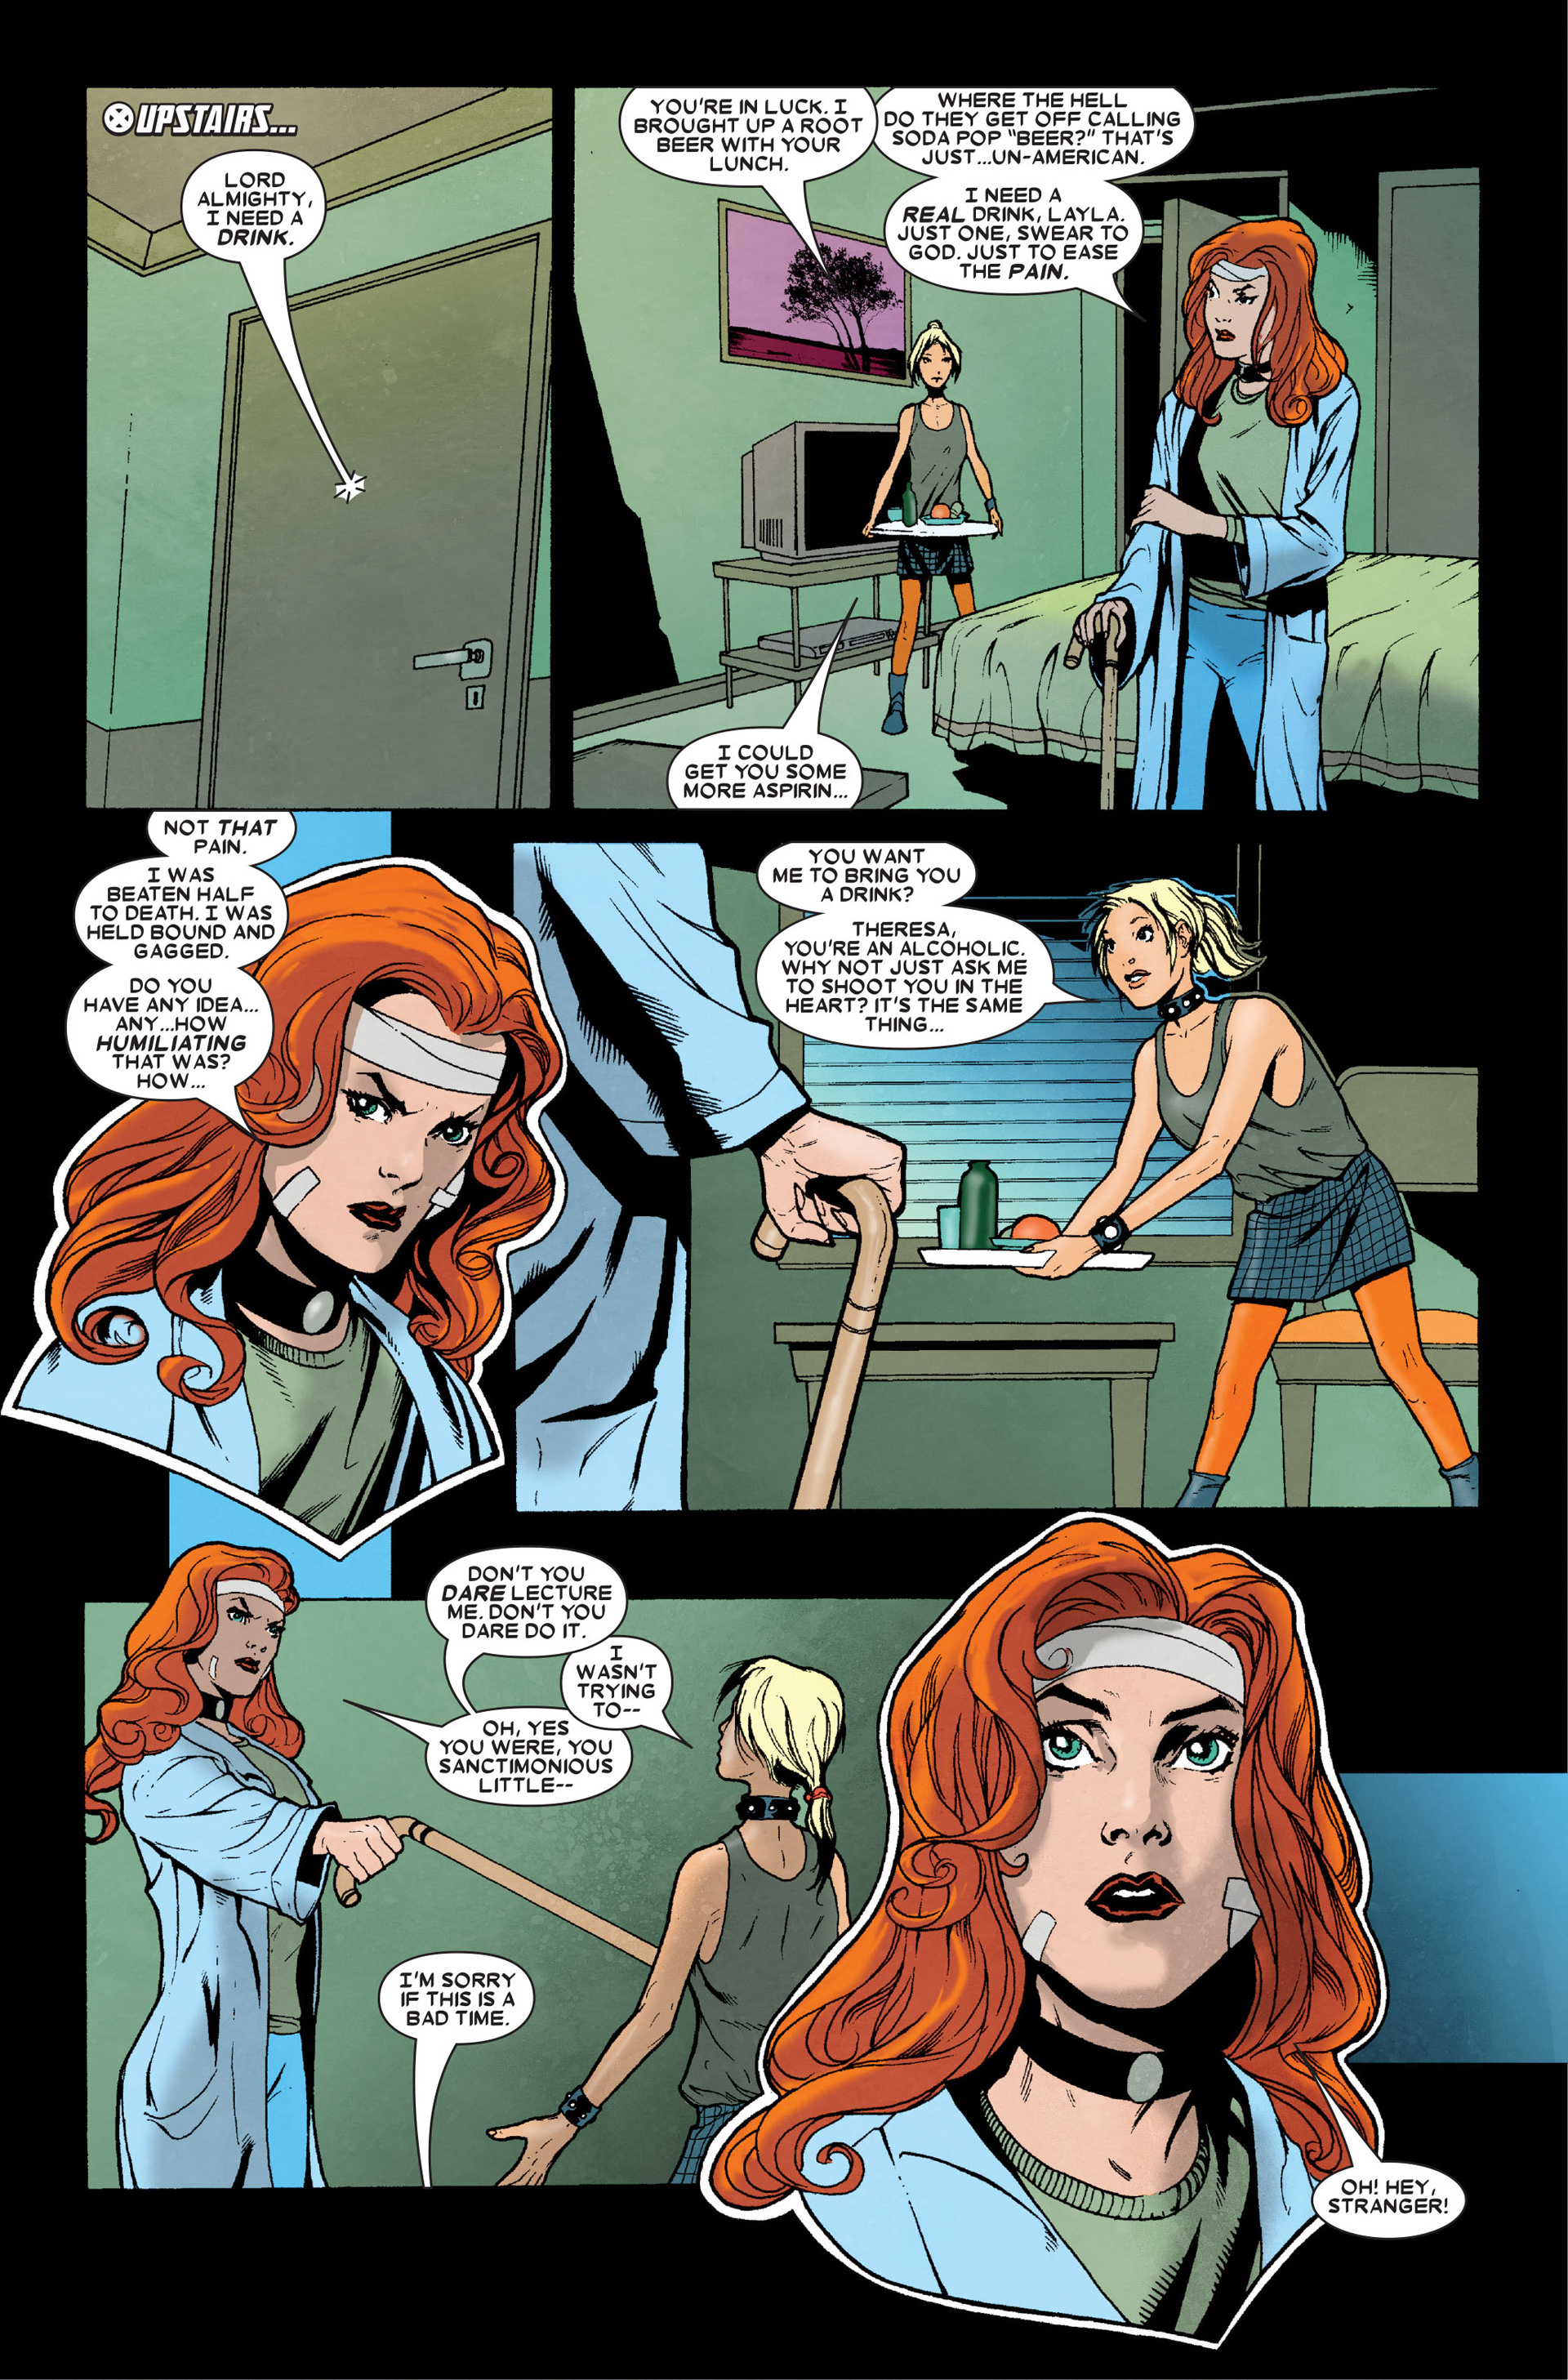 X-Factor (2006) 7 Page 4